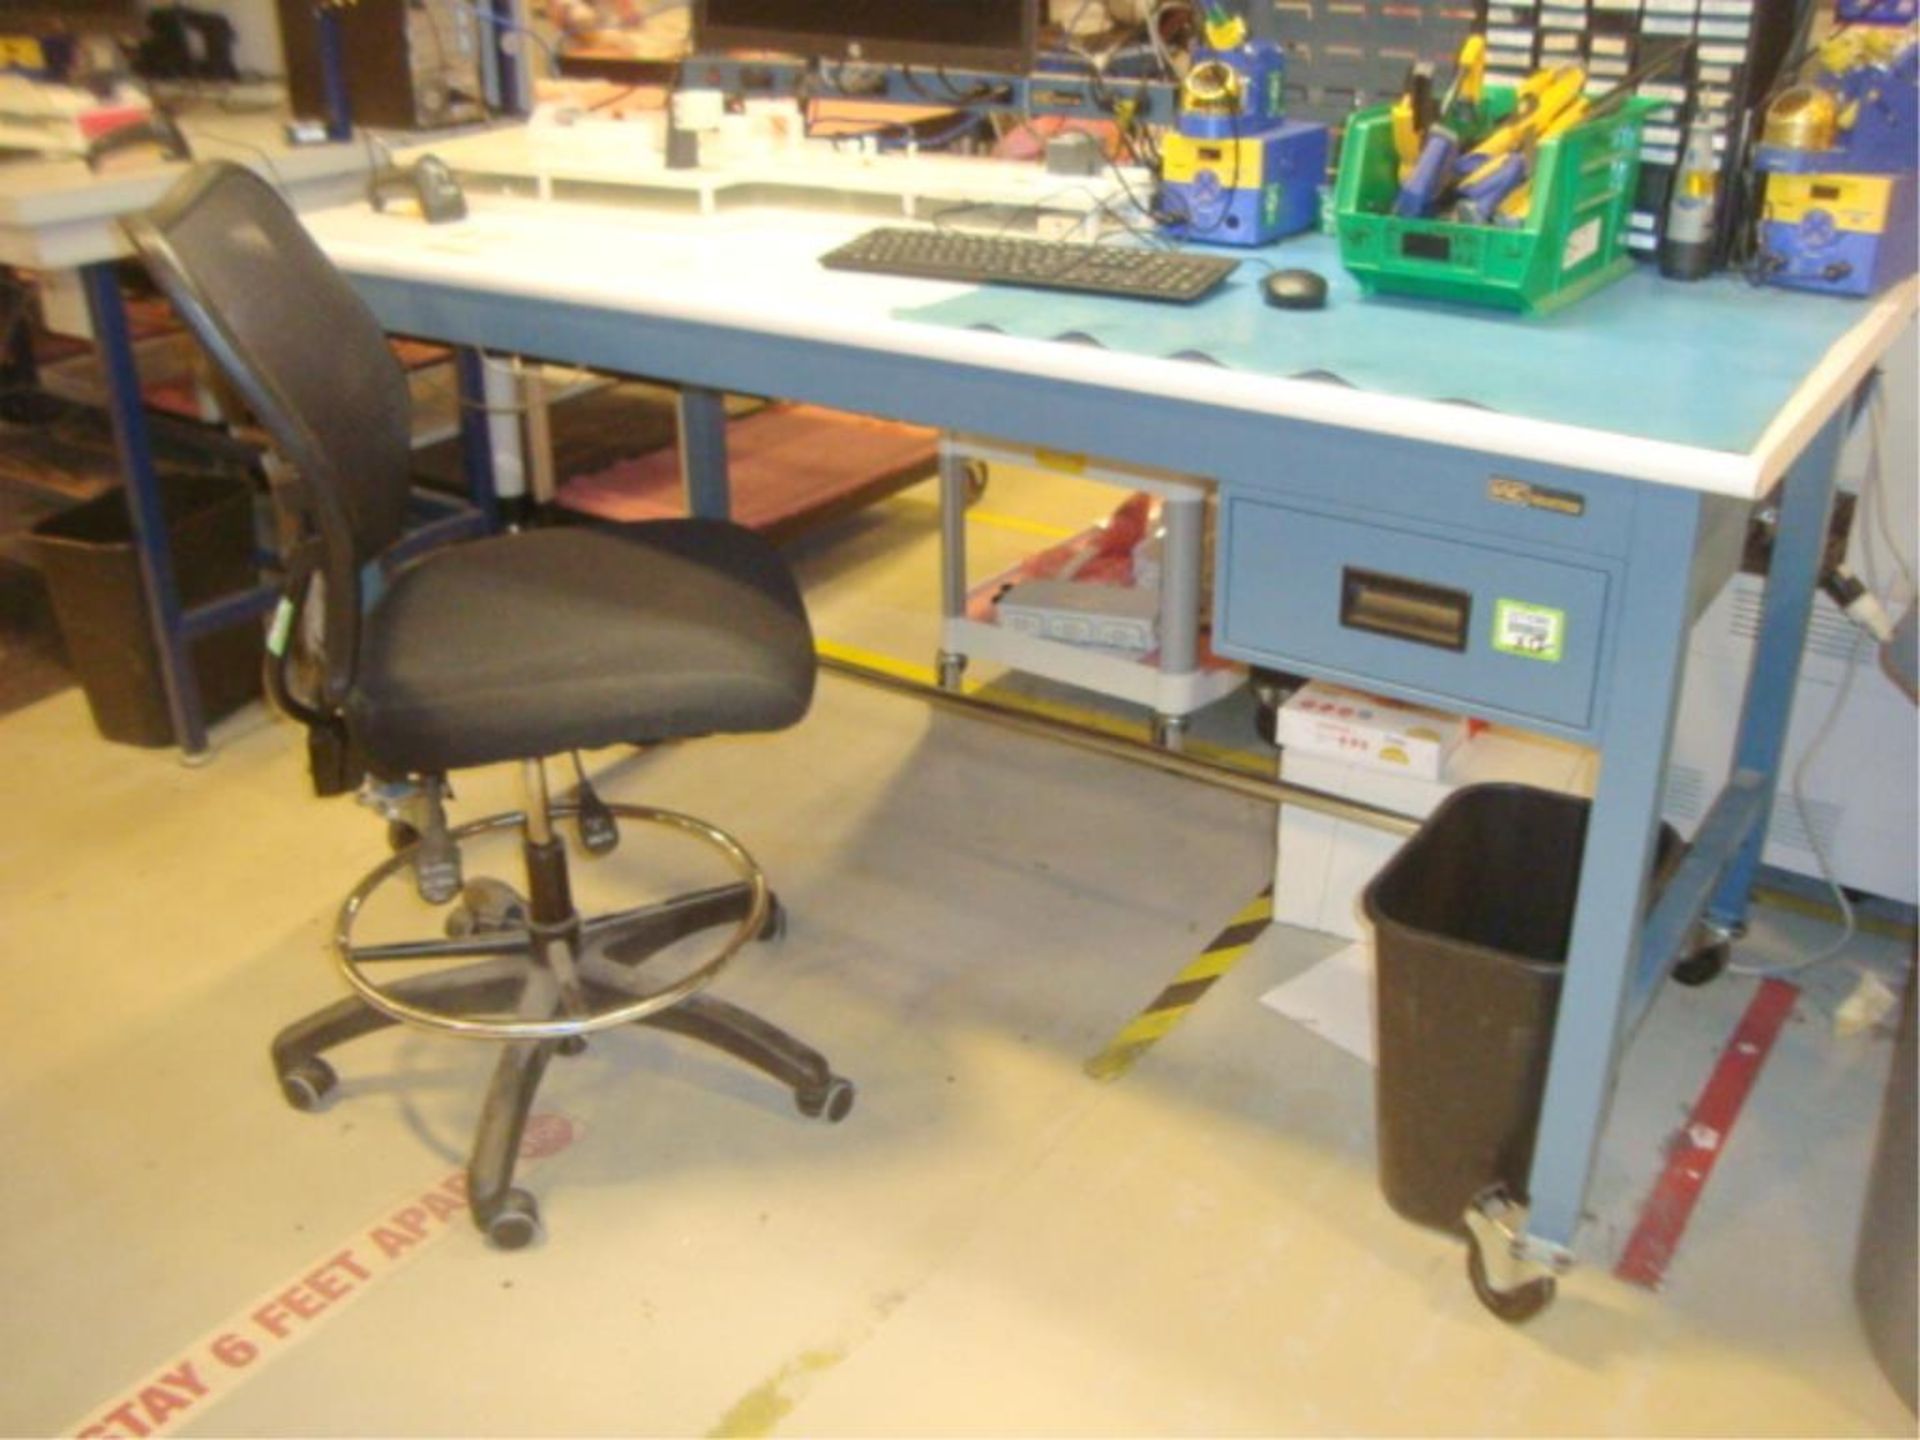 Mobile Workstation Benches & Chairs - Image 3 of 15